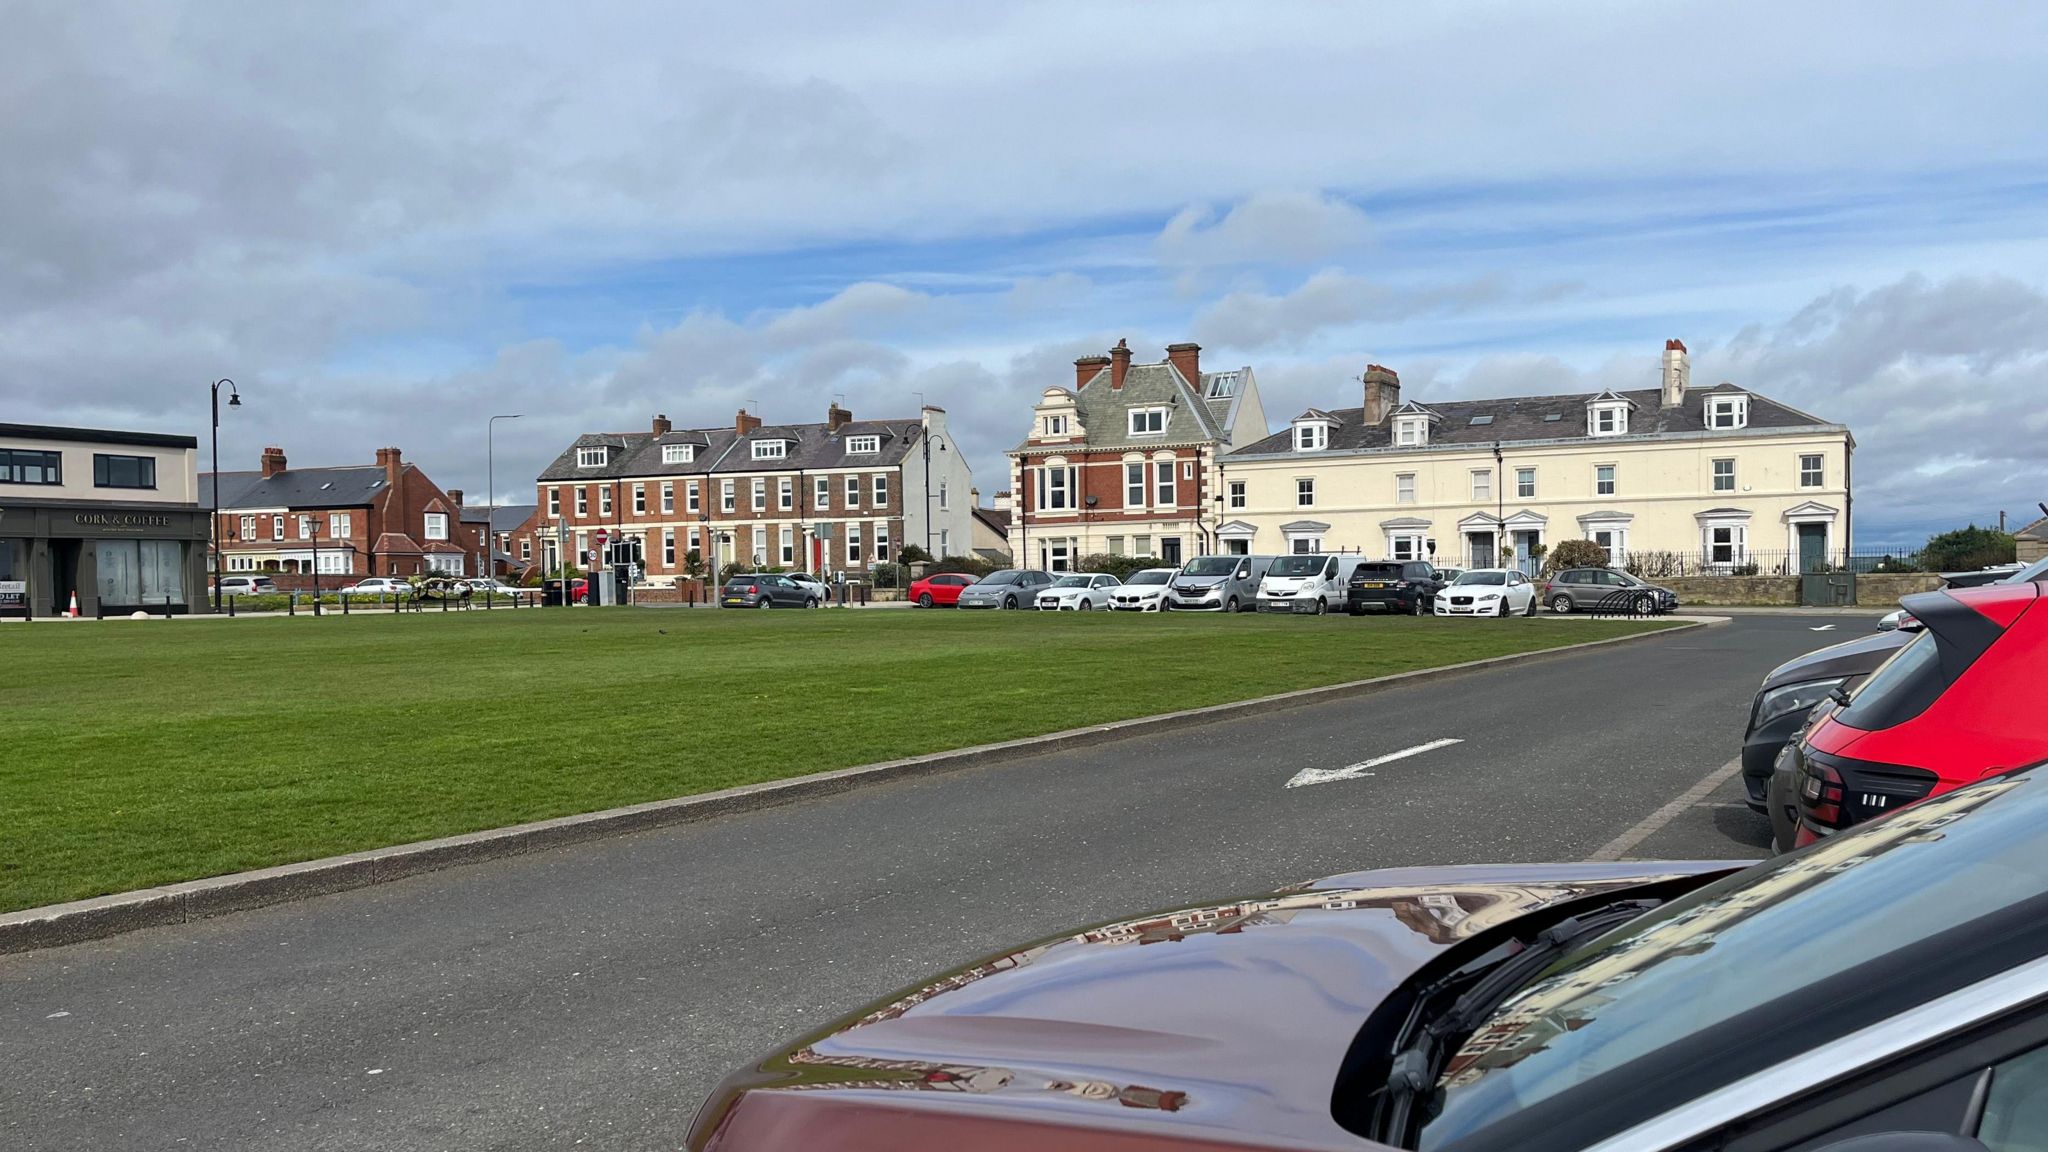 North Street in Seaham with cars parked in front of some posh houses 